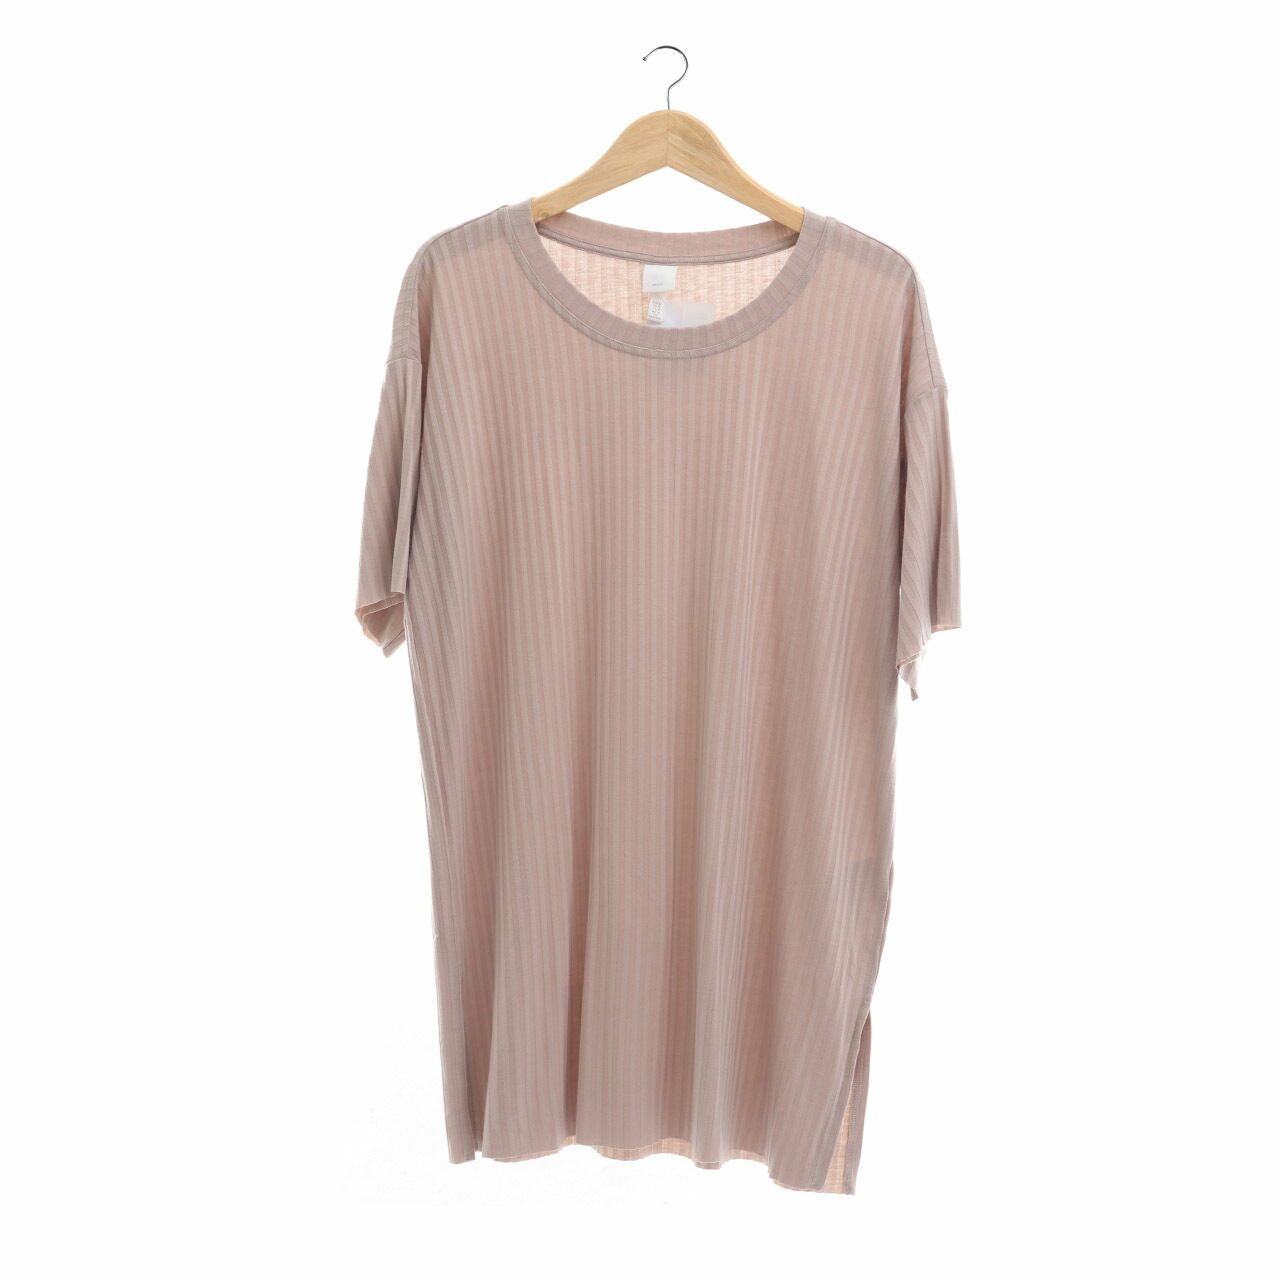 H&M Taupe Blouse